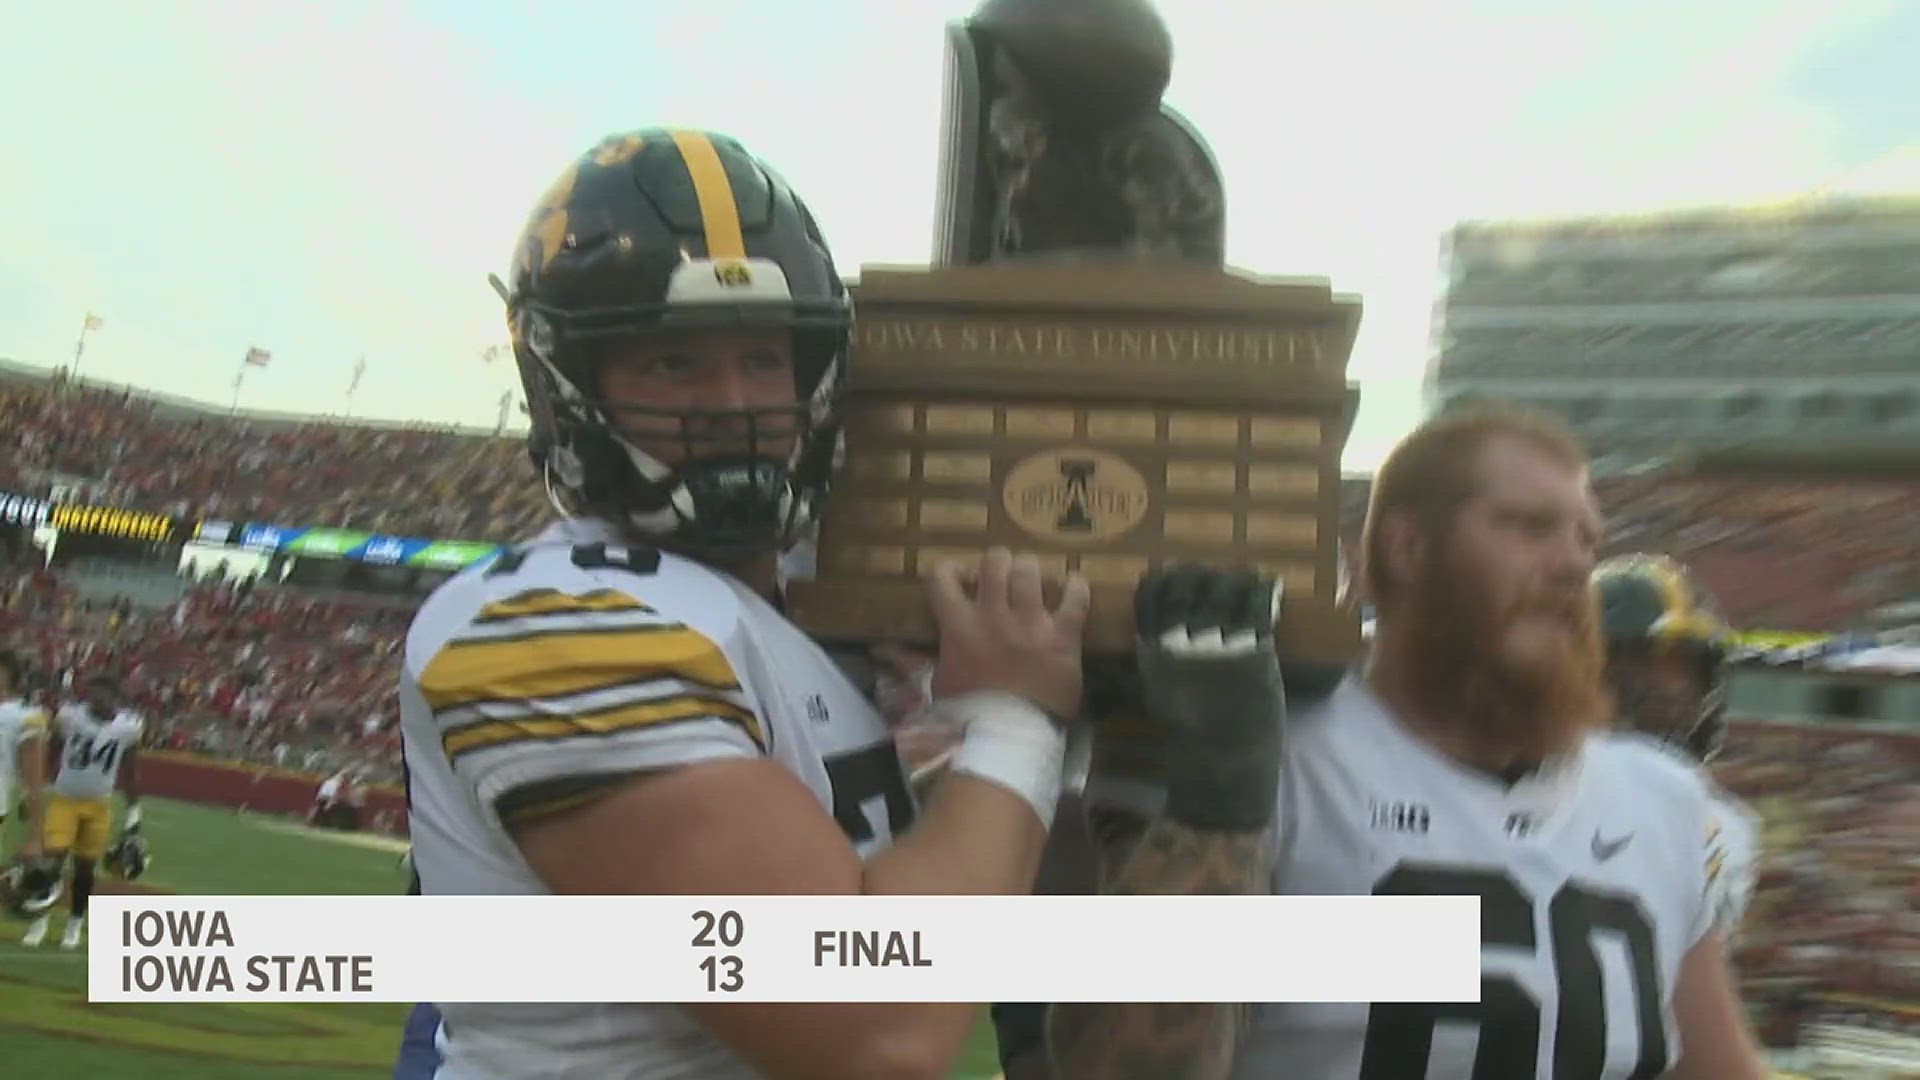 Iowa wins the Cy-Hawk game 20-13. This is the 6th straight win for the Hawkeyes in Ames.